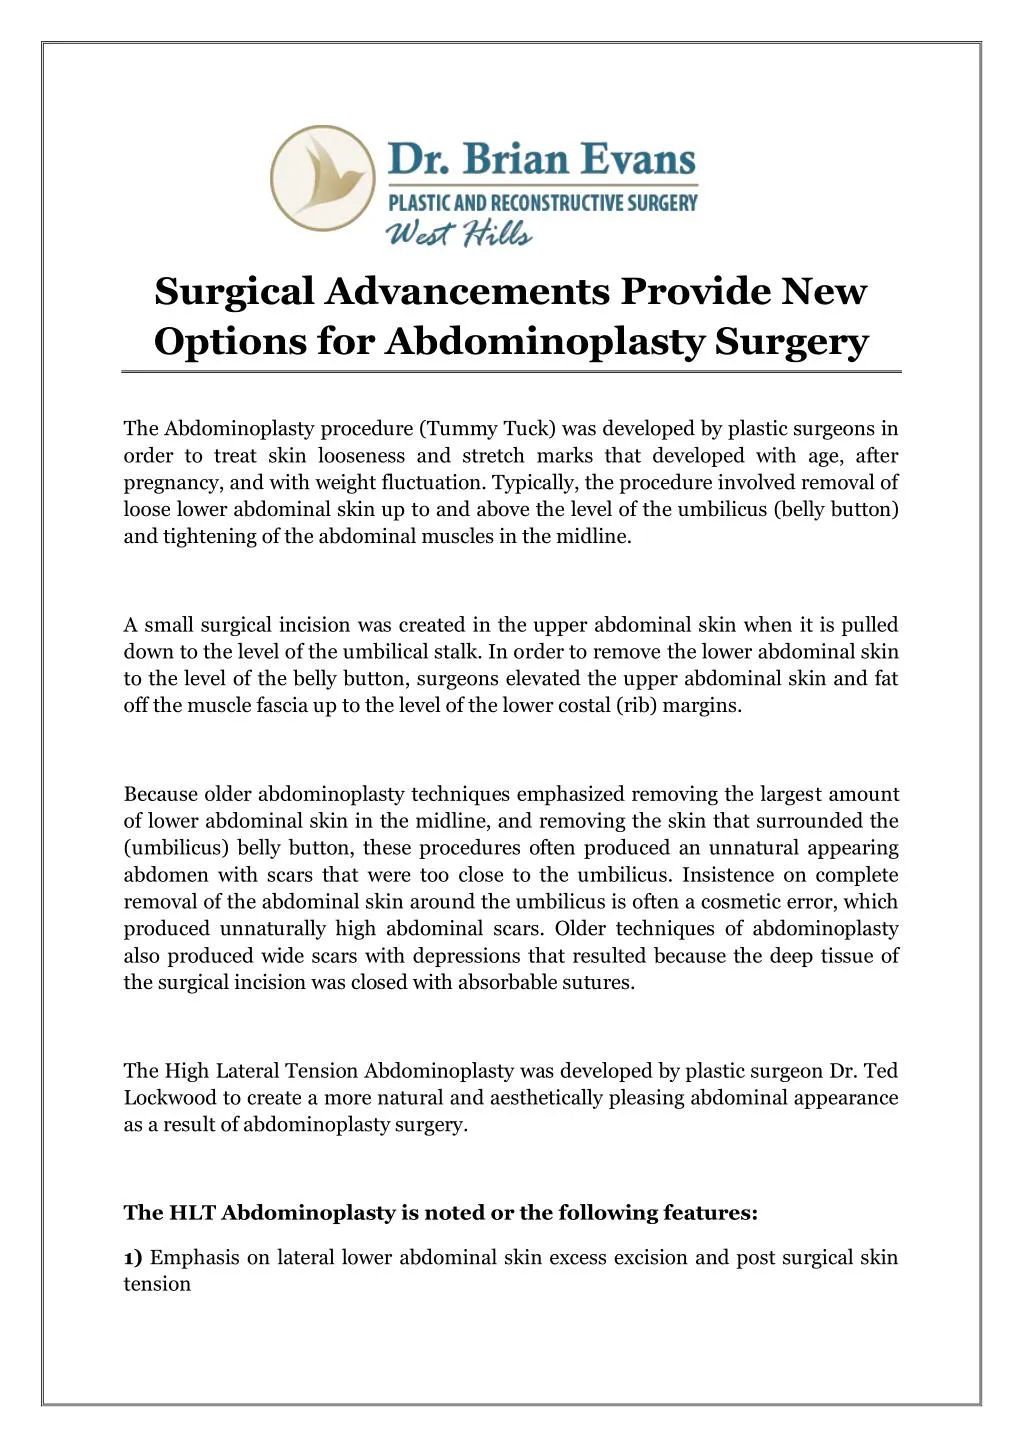 surgical advancements provide new options